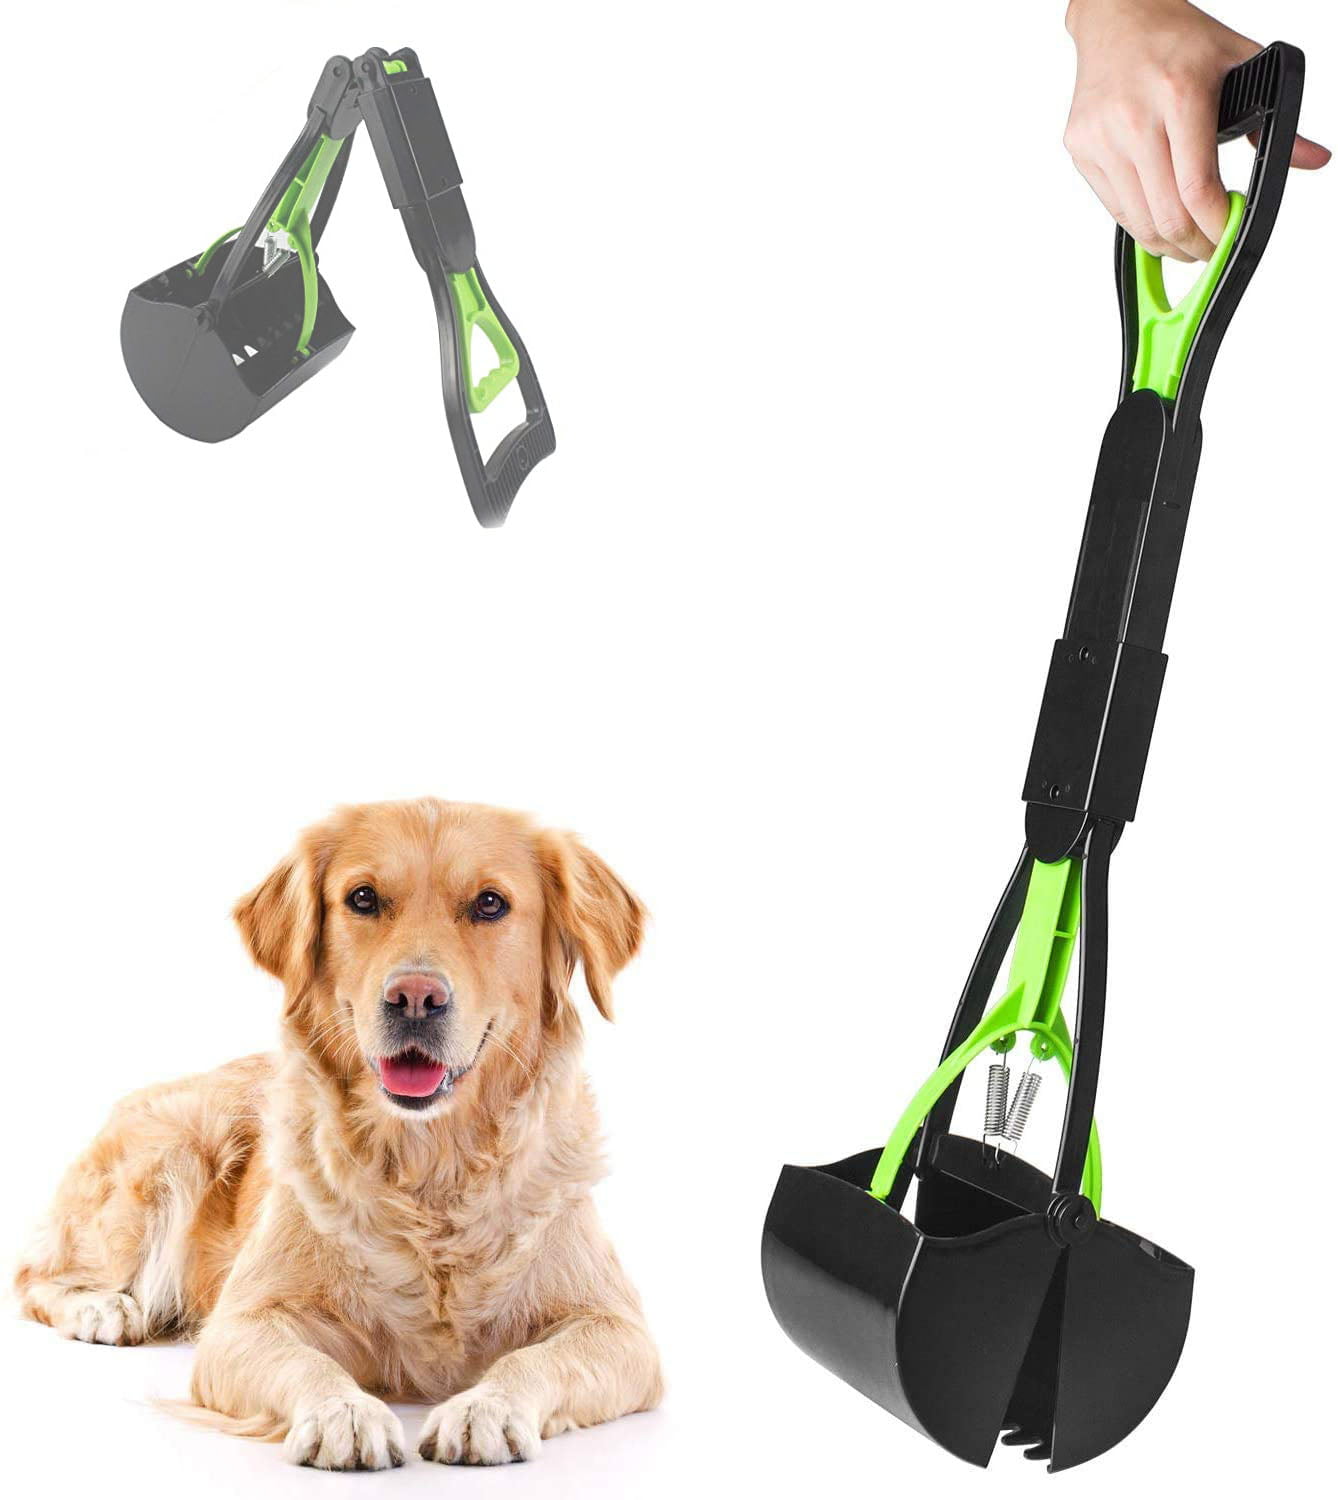 PPOGOO Non-Breakable Pet Pooper Scooper for Dogs and Cats High Strength Material and Durable Spring for Easy Grass and Gravel Pick Up